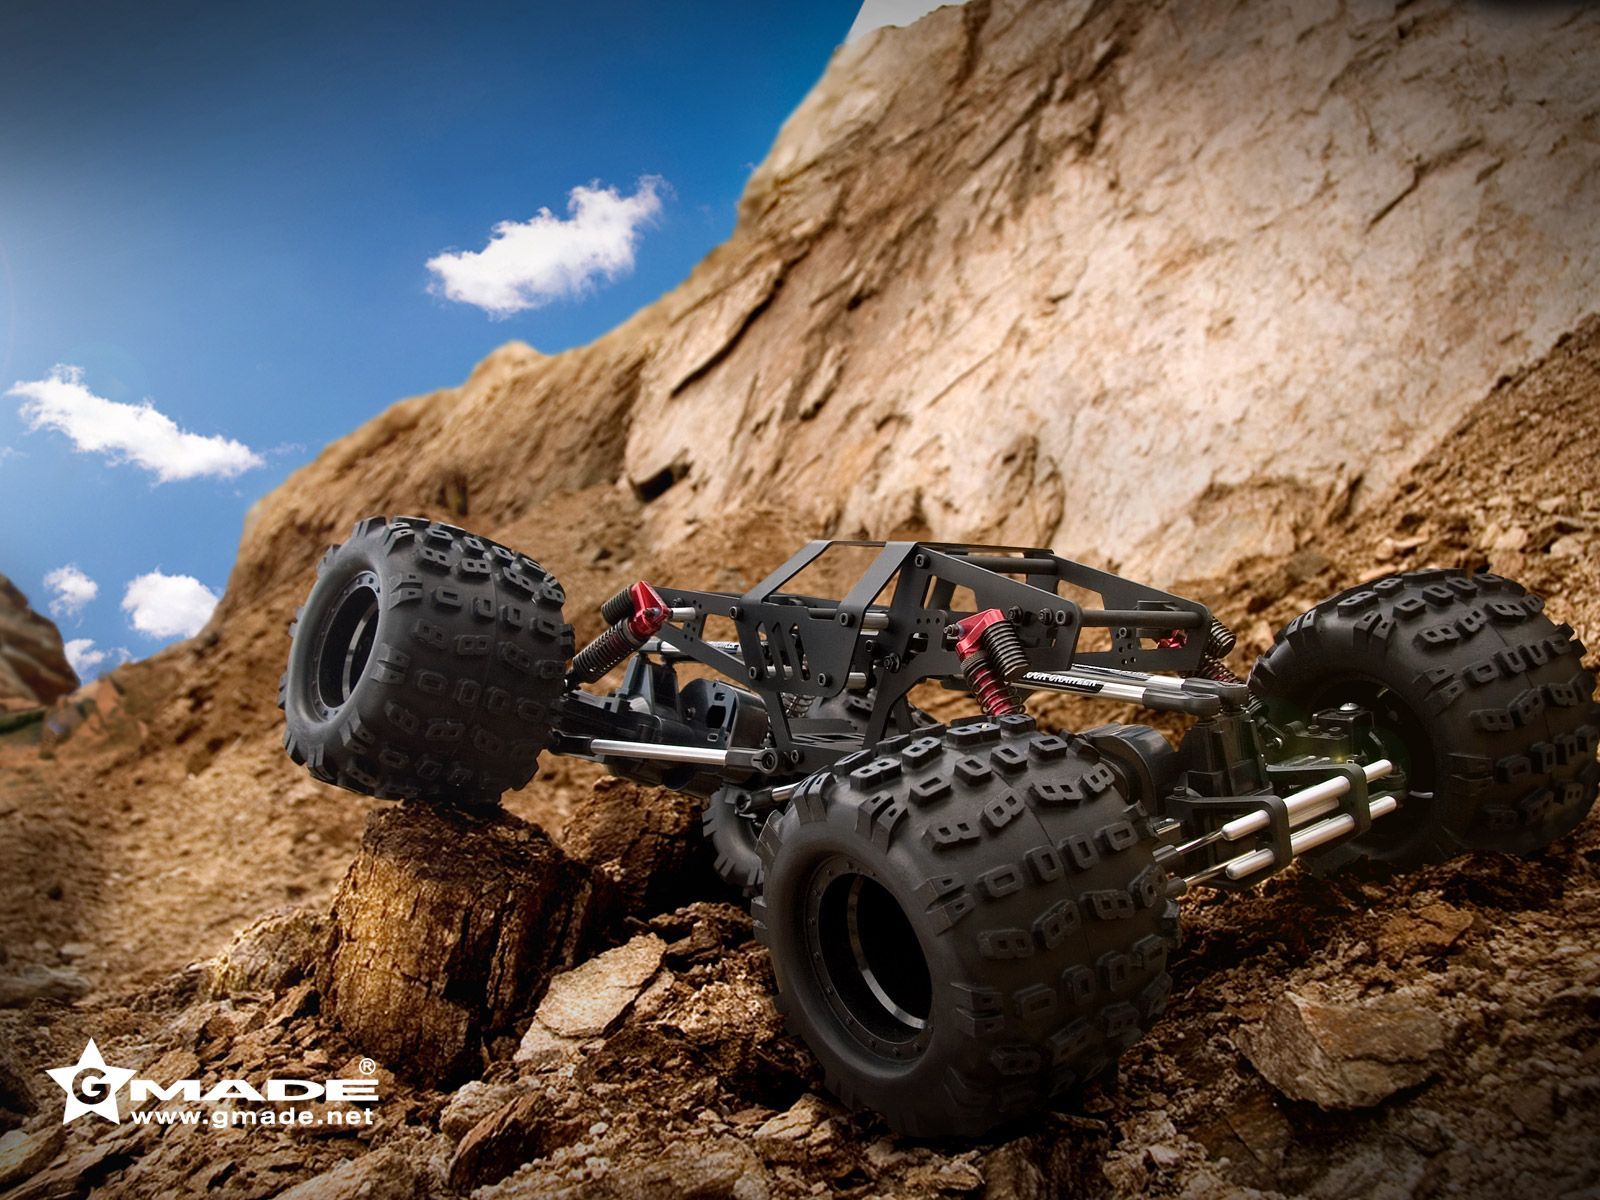 rc rock crawlers Image. Rc rock crawler, Rock crawler, Rc cars and trucks